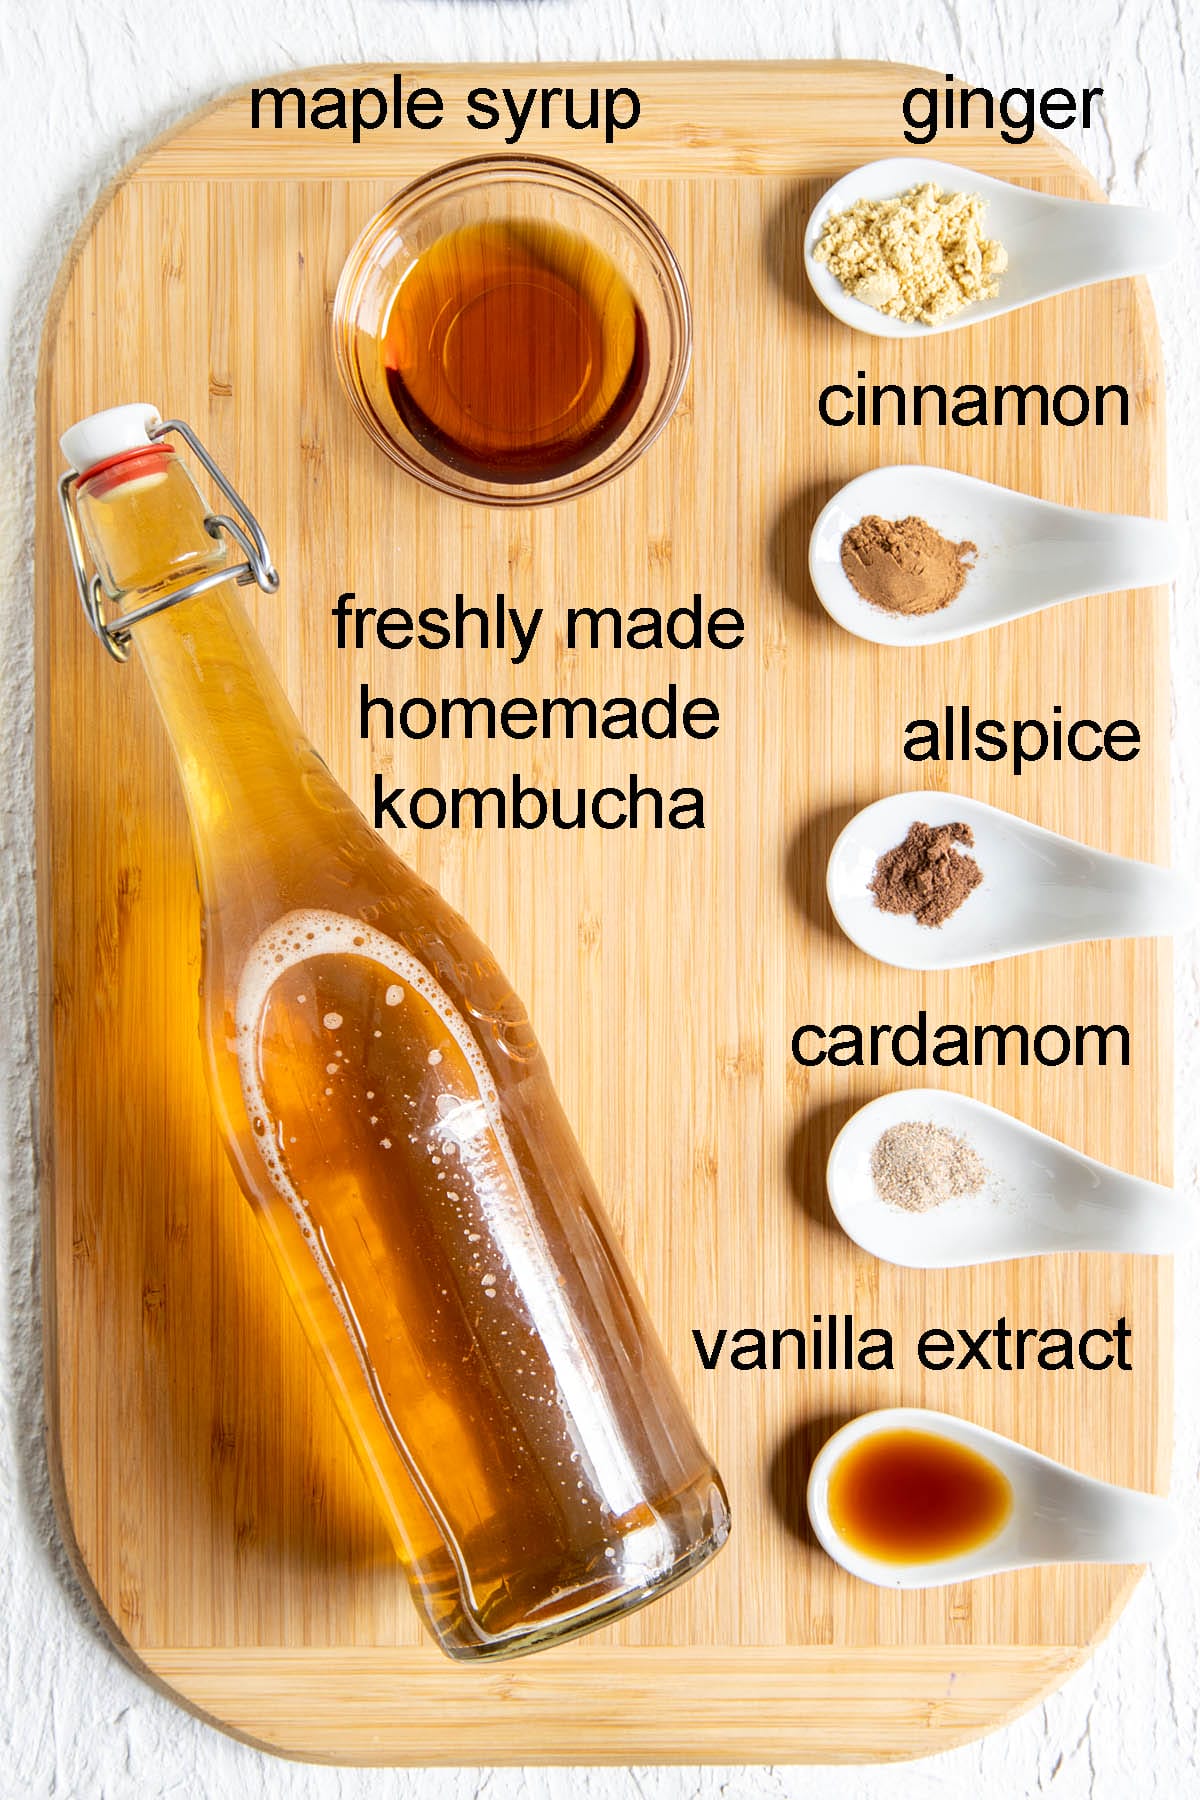 Ingredients for spiced kombucha on a cutting board with labels.